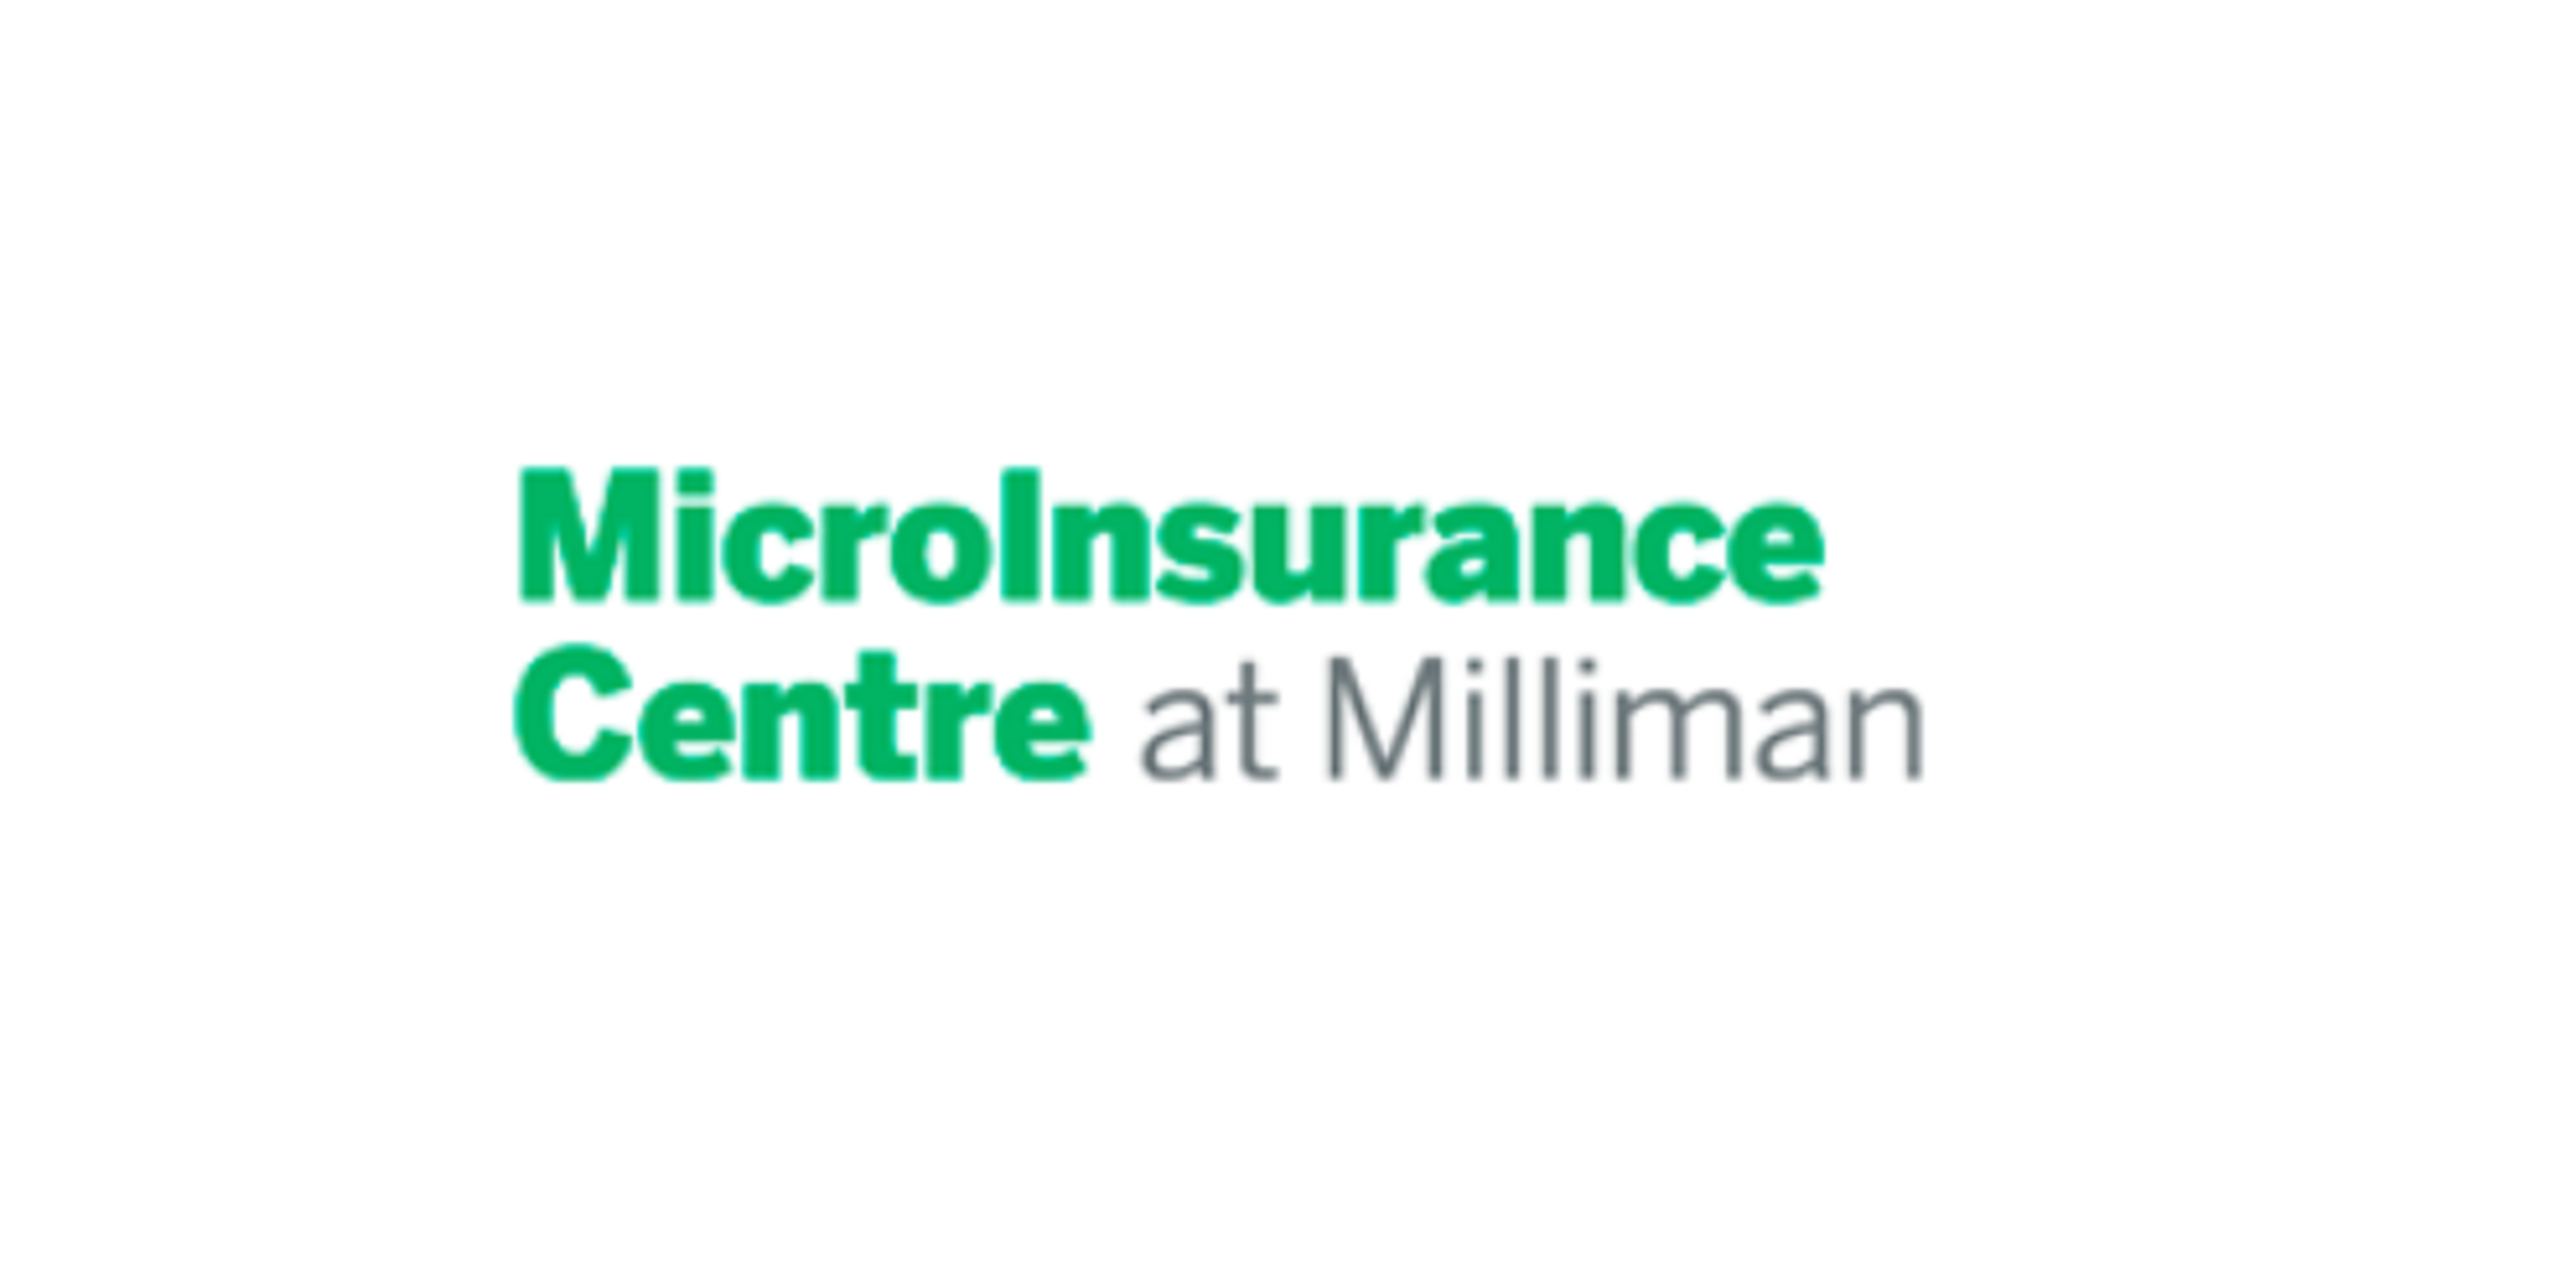 Microinsurance Centre at Milliman